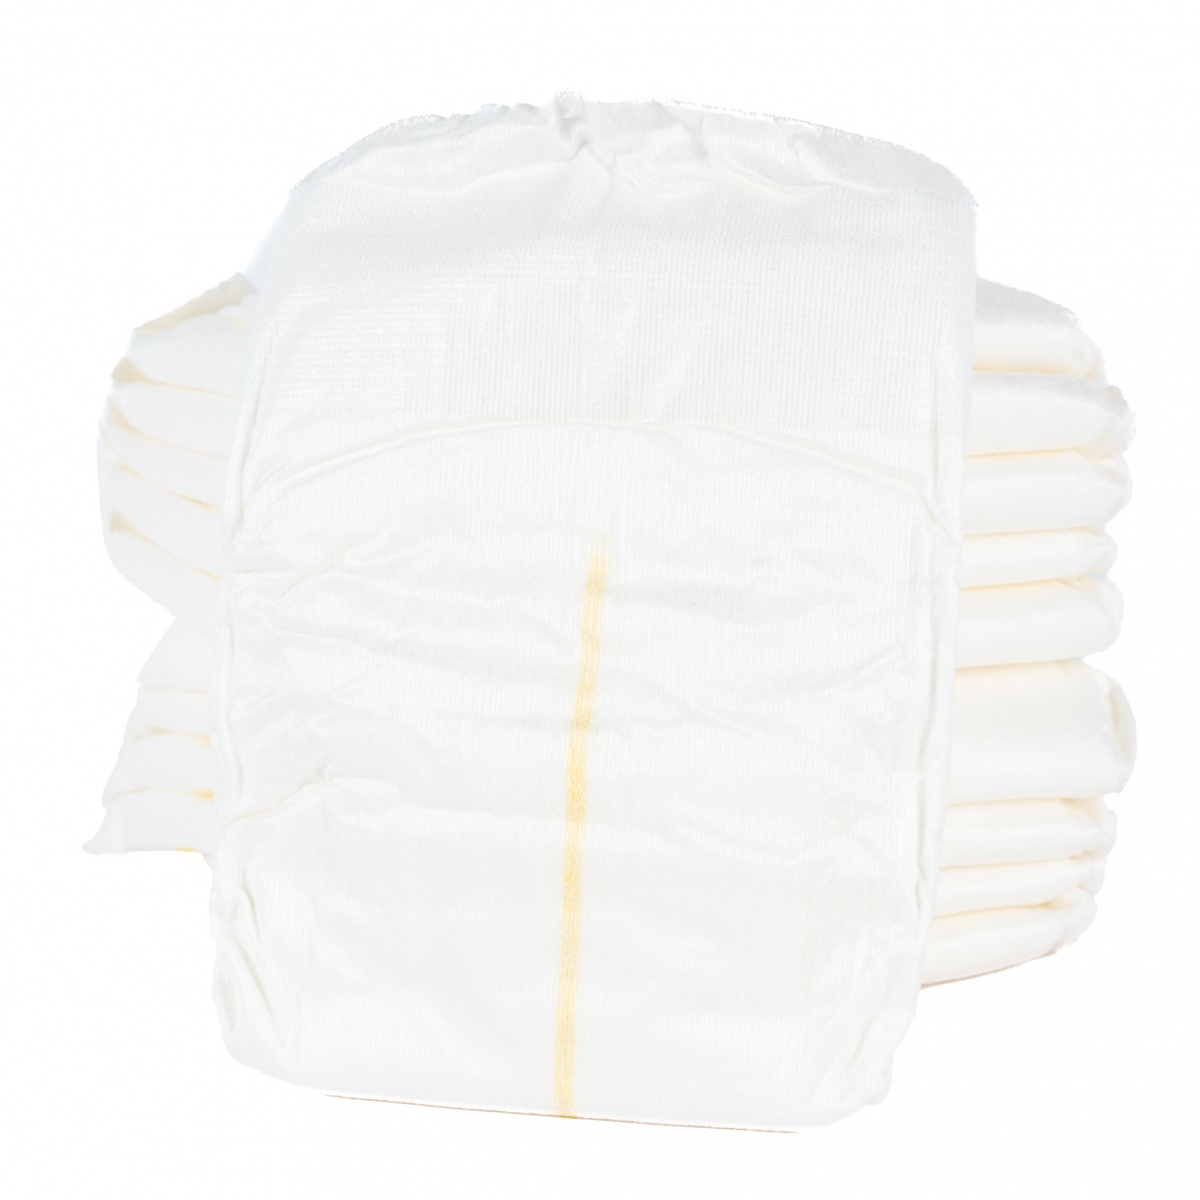 dyper bamboo disposable diaper review